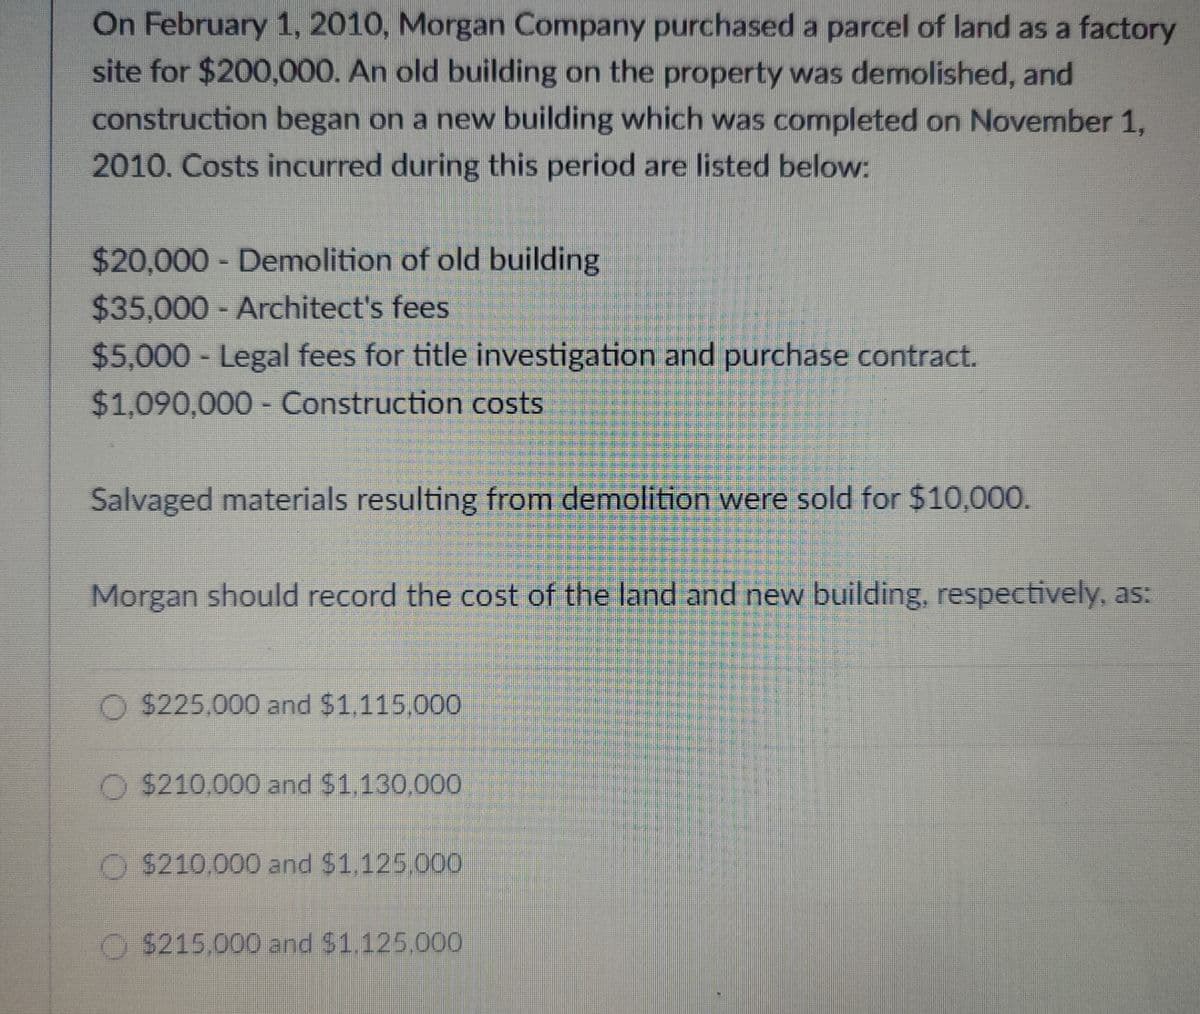 On February 1, 2010, Morgan Company purchased a parcel of land as a factory
site for $200,000. An old building on the property was demolished, and
construction began on a new building which was completed on November 1,
2010. Costs incurred during this period are listed below:
$20,000 - Demolition of old building
$35,000 - Architect's fees
$5,000 - Legal fees for title investigation and purchase contract.
$1,090,000 - Construction costs
Salvaged materials resulting from demolition were sold for $10,000.
Morgan should record the cost of the land and new building, respectively, as:
$225,000 and $1,115,000
$210,000 and $1,130,000
$210,000 and $1,125,000
$215.000 and $1.125.000